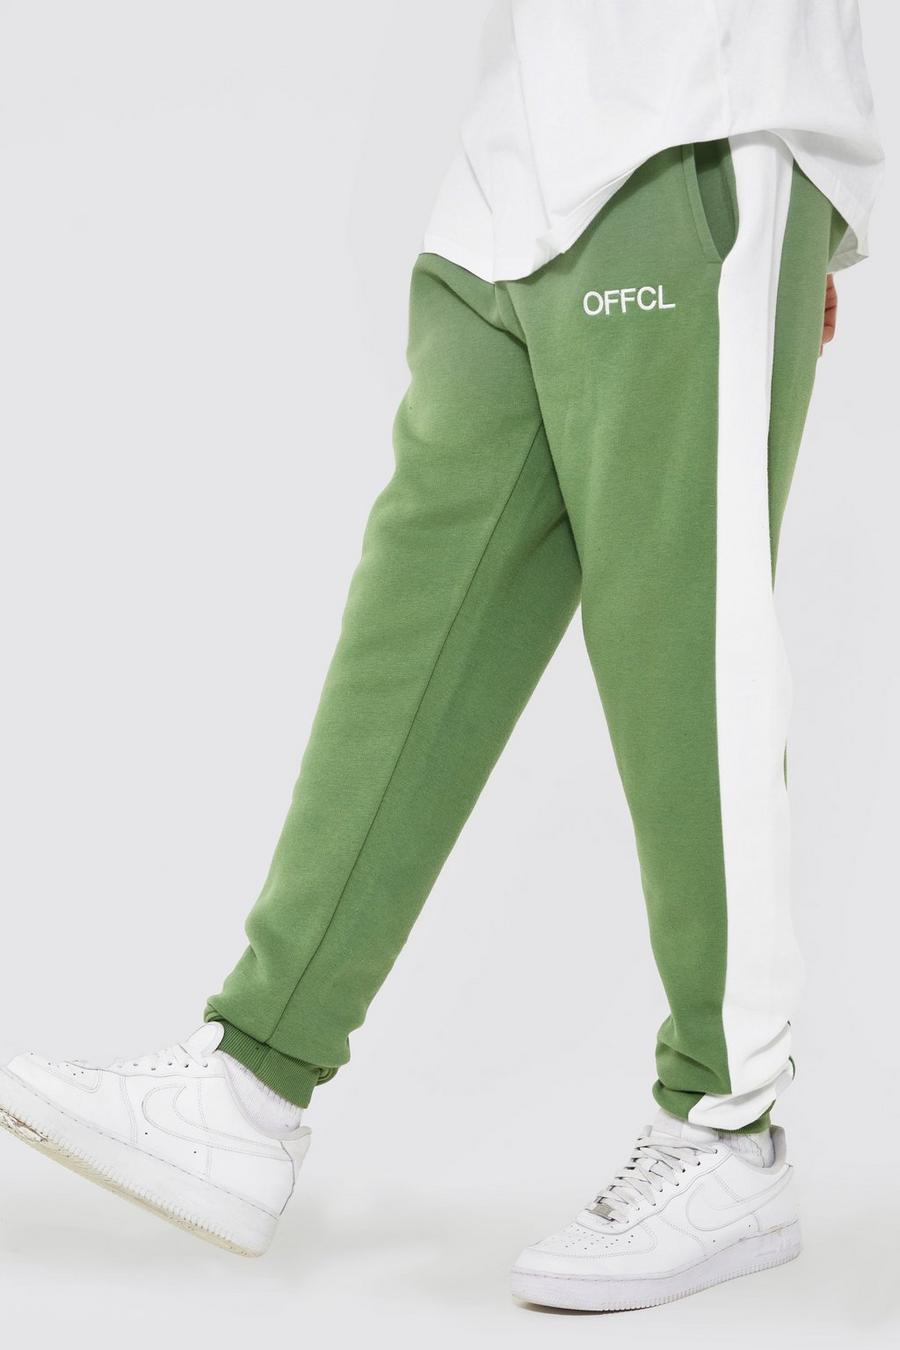 Sage green Tall Offcl Skinny Side Panel Jogger